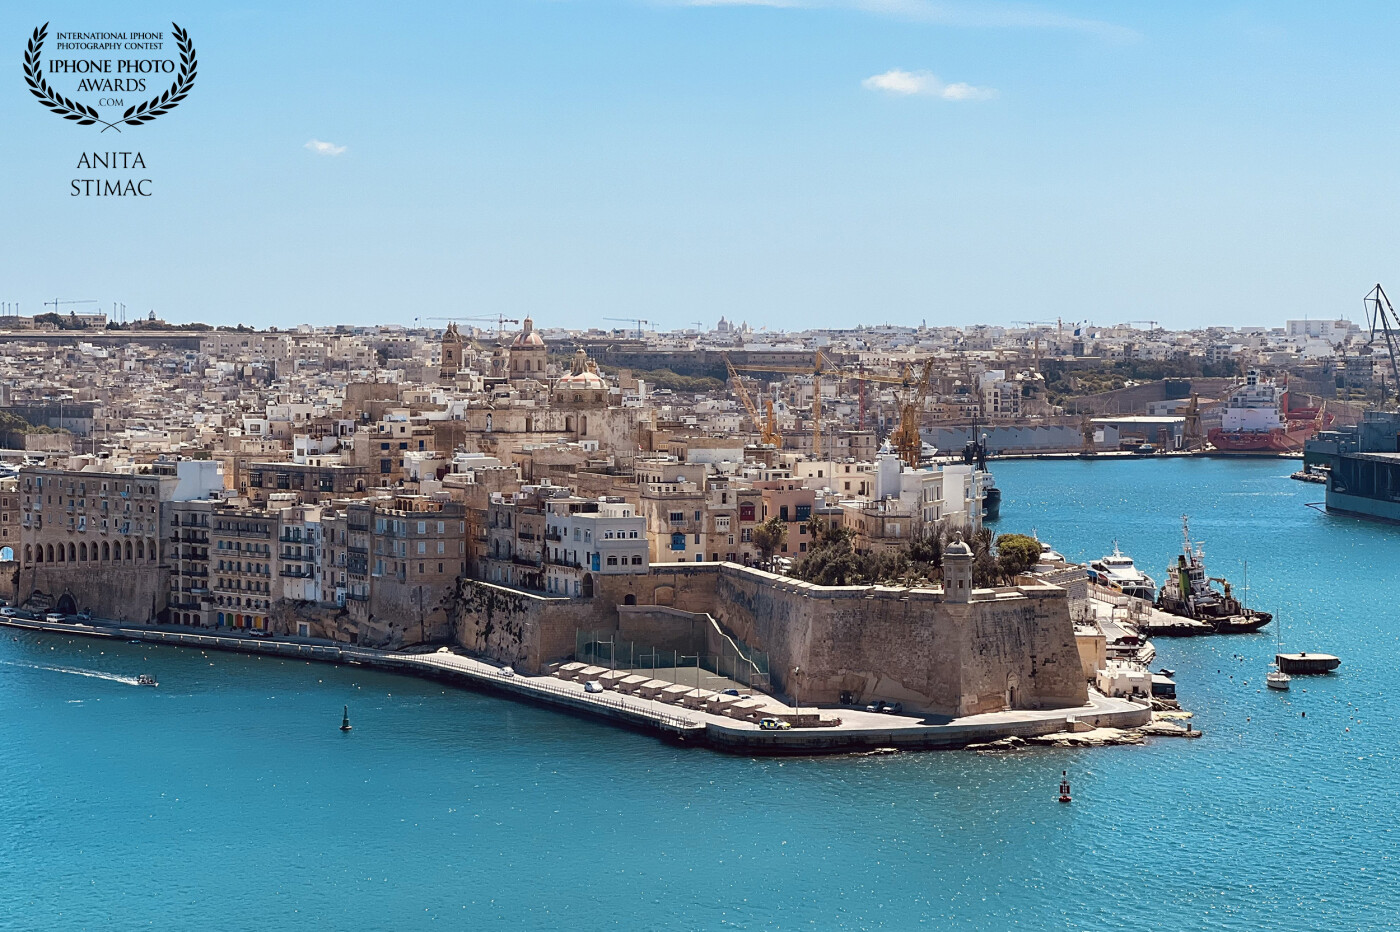 Senglea, also called Isla, town, one of the Three Cities (the others being Cospicua and Vittoriosa) of eastern Malta.